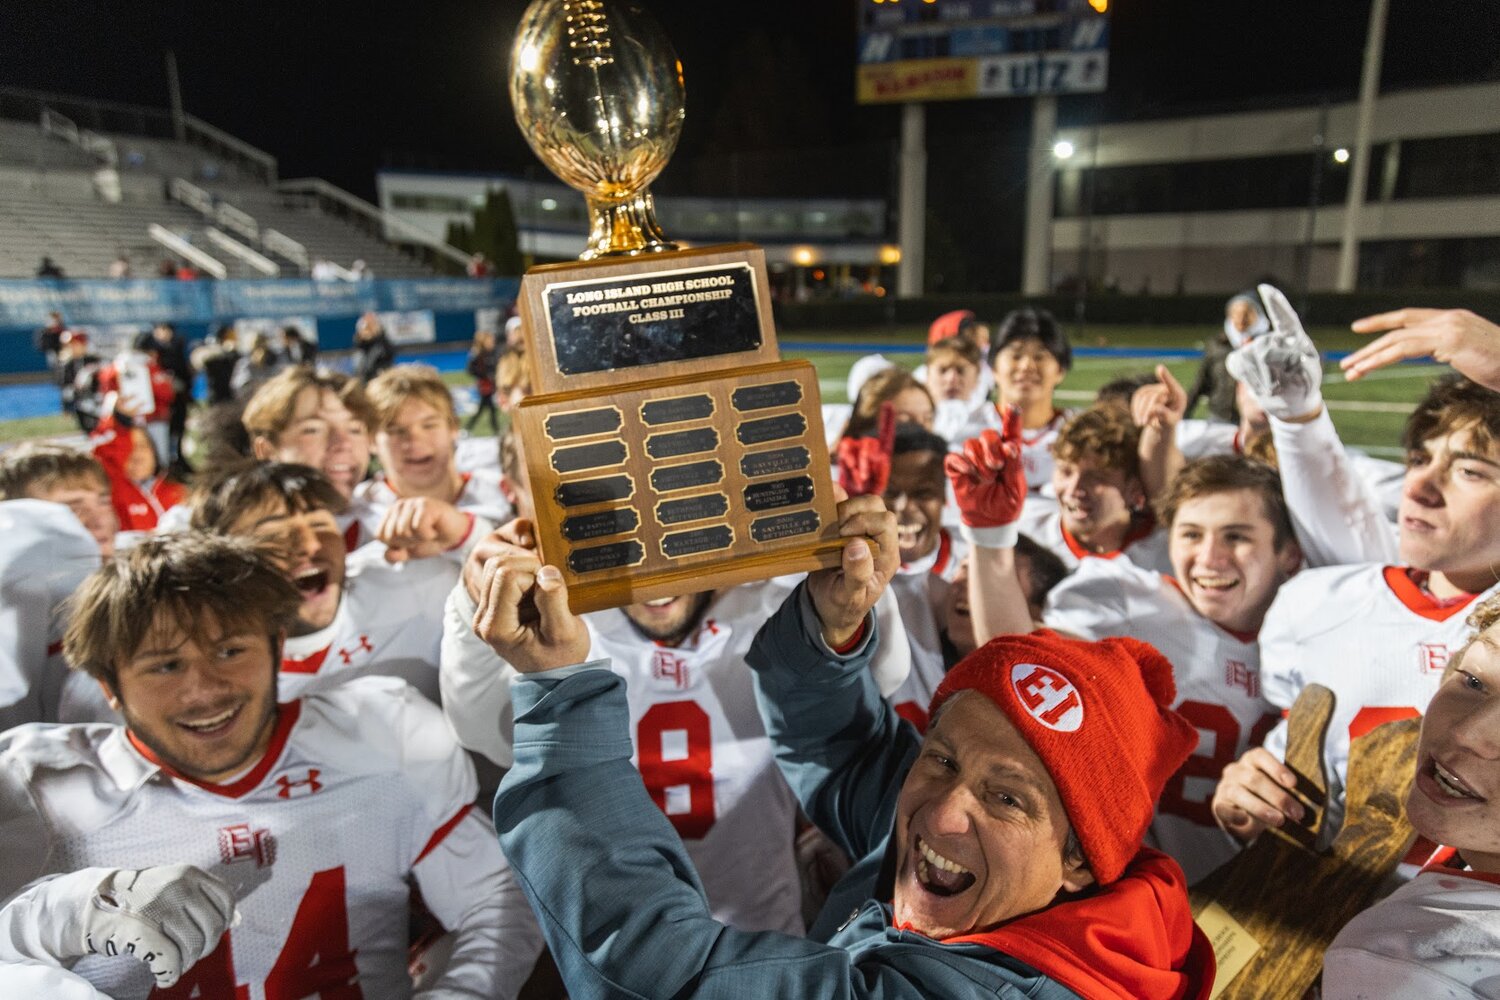 EI pride filled the air as the Redmen accepted their trophy following their monumental win, securing their title of Long Island High School Football Division III Champions.